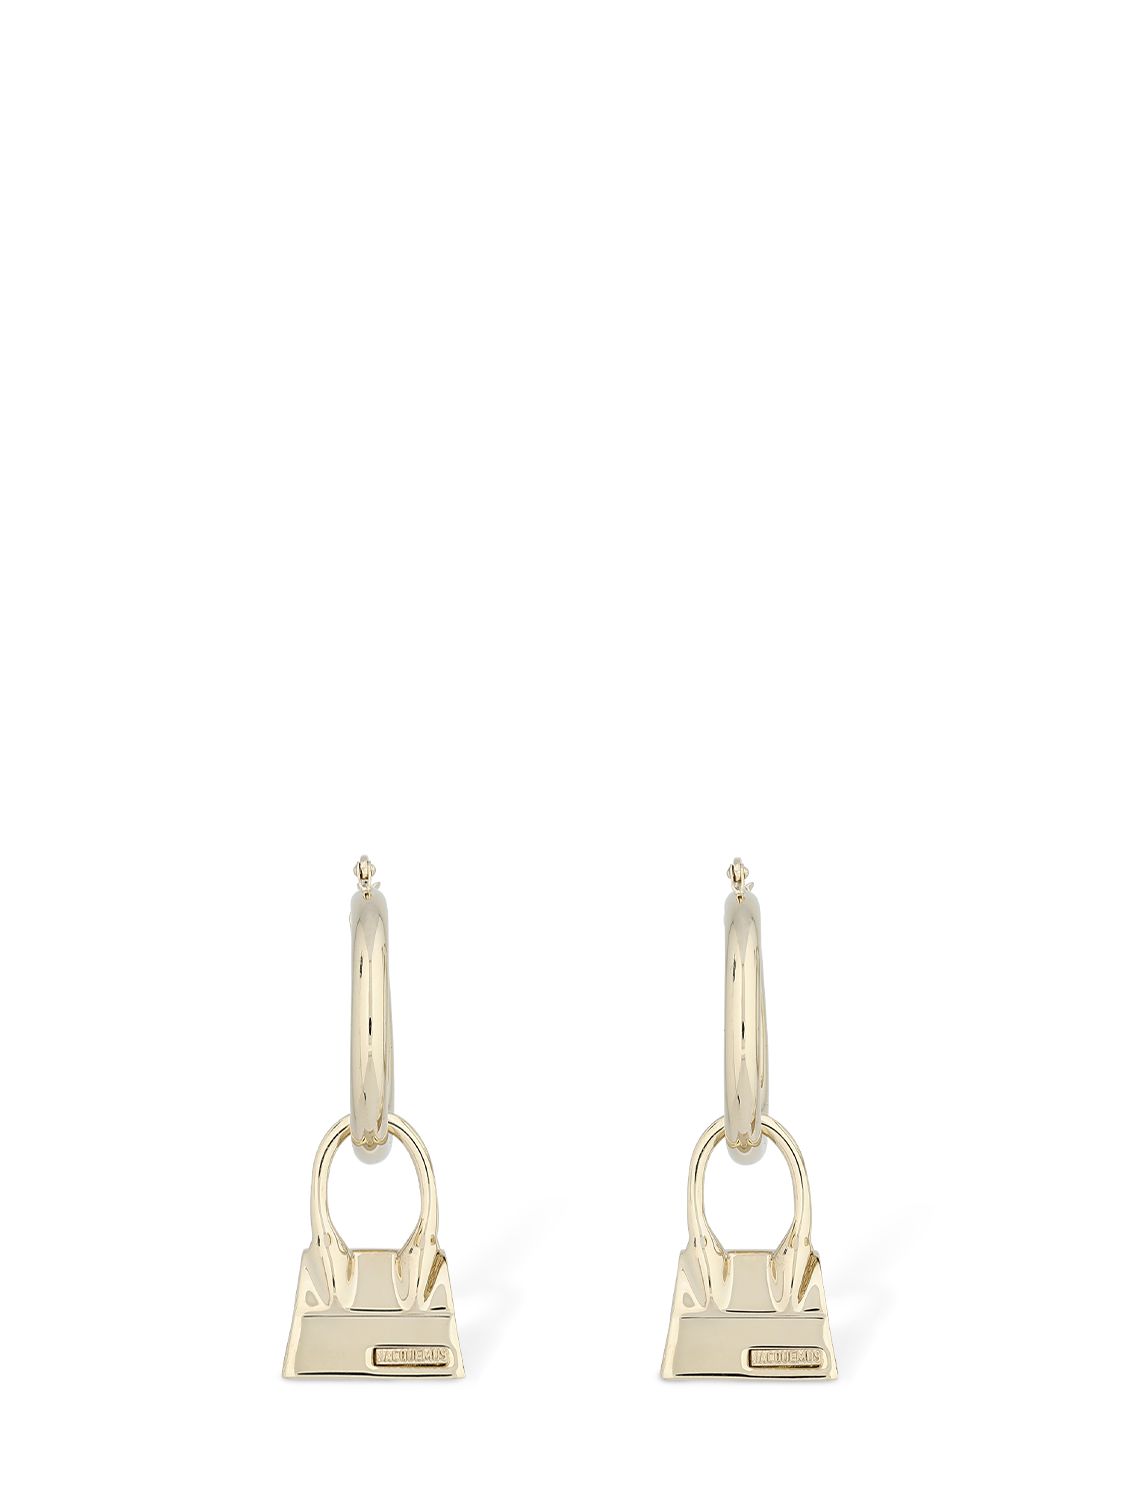 Les Creoles Chiquito Earrings